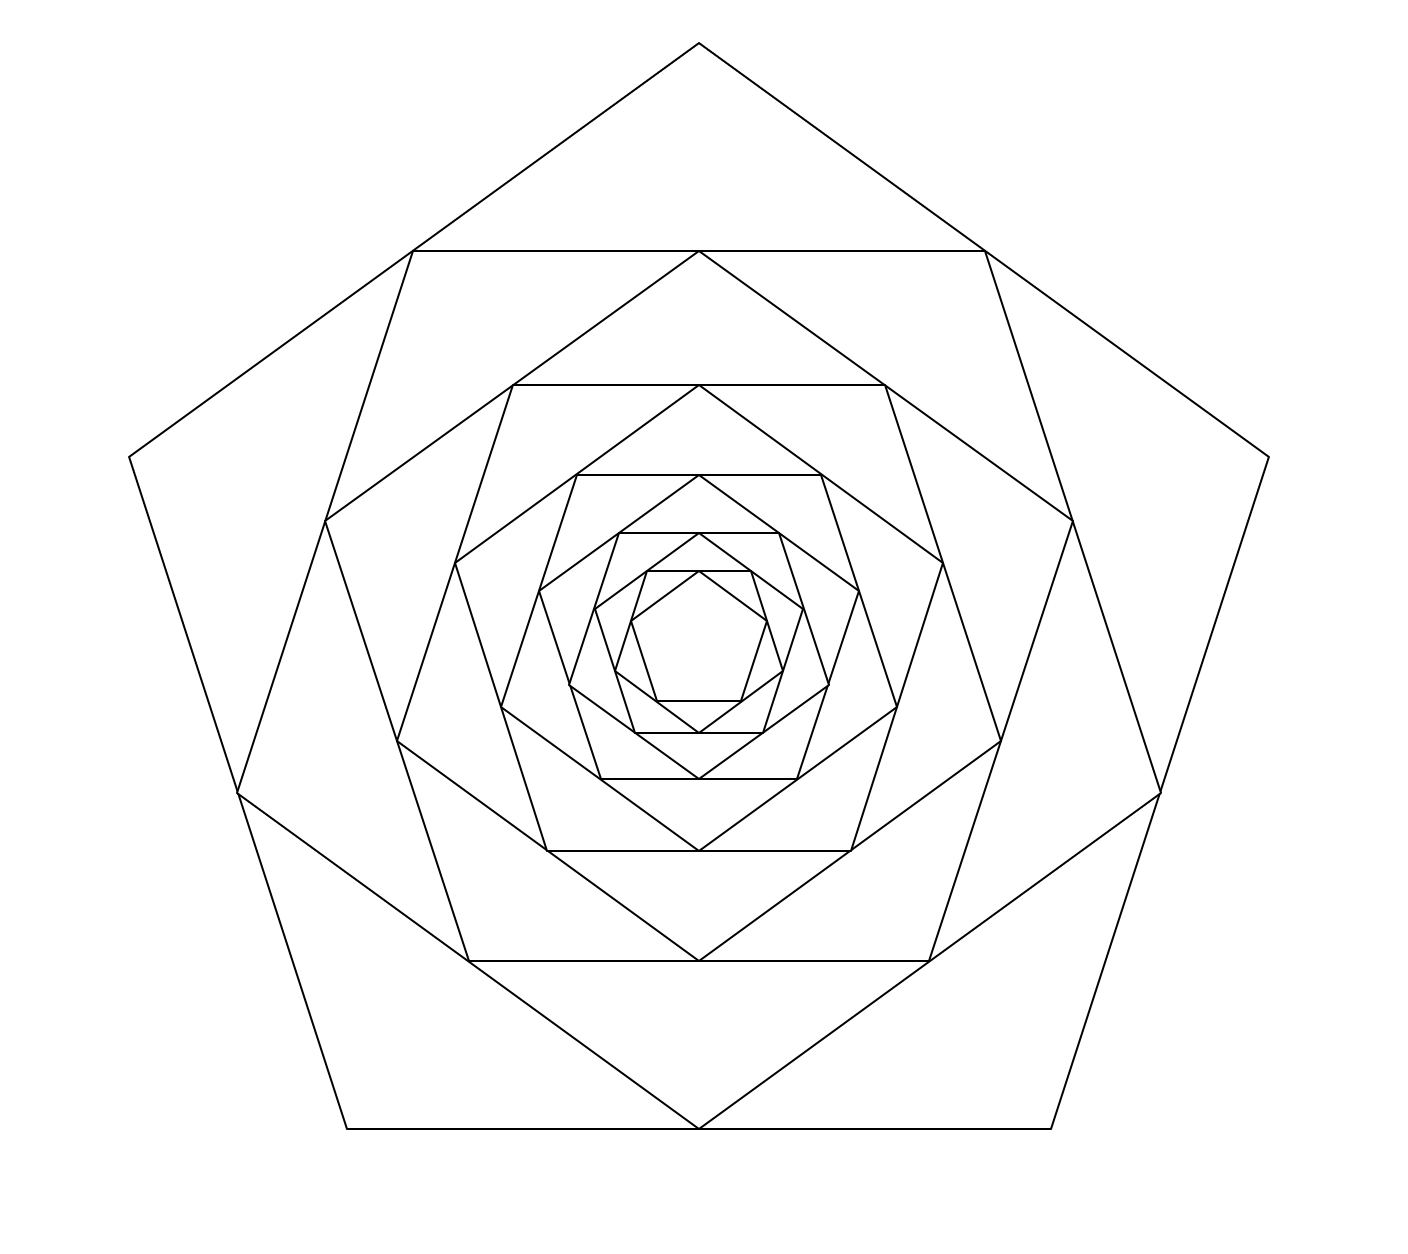 A regular pentagon which contains an upside-down pentagon inside it, which itself contains an upright pentagon inside it, and so on.